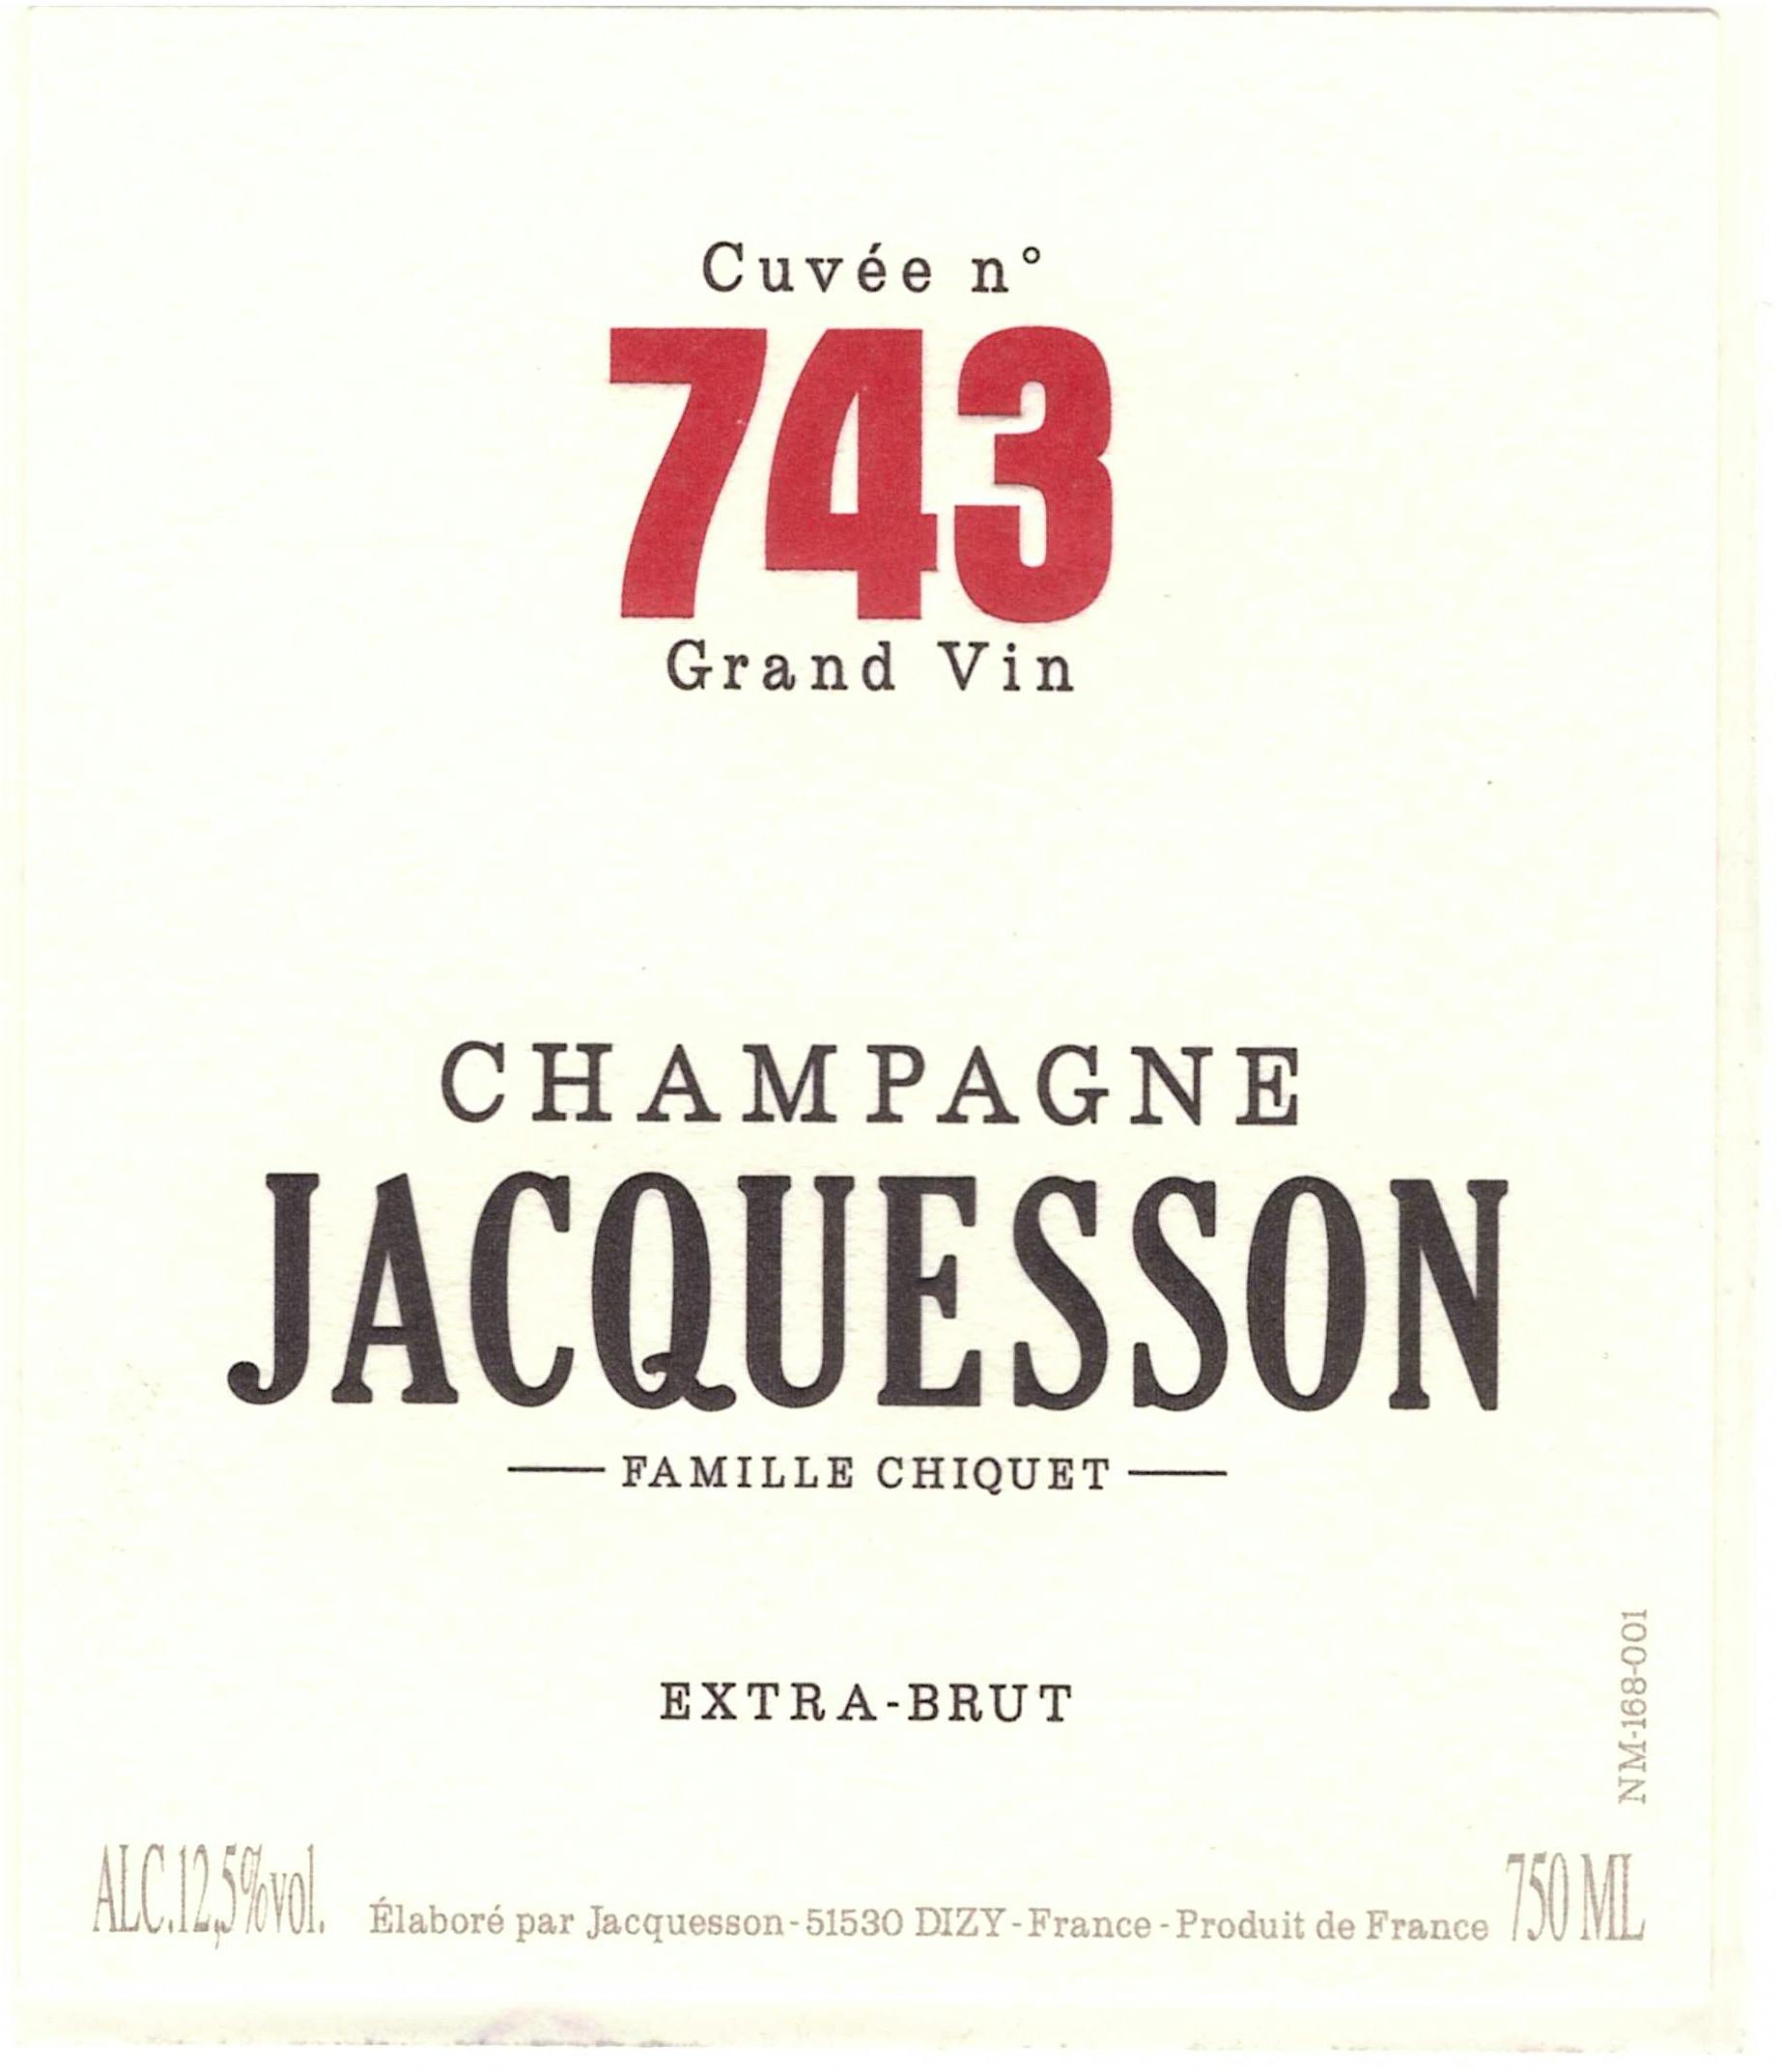 Label for Jacquesson